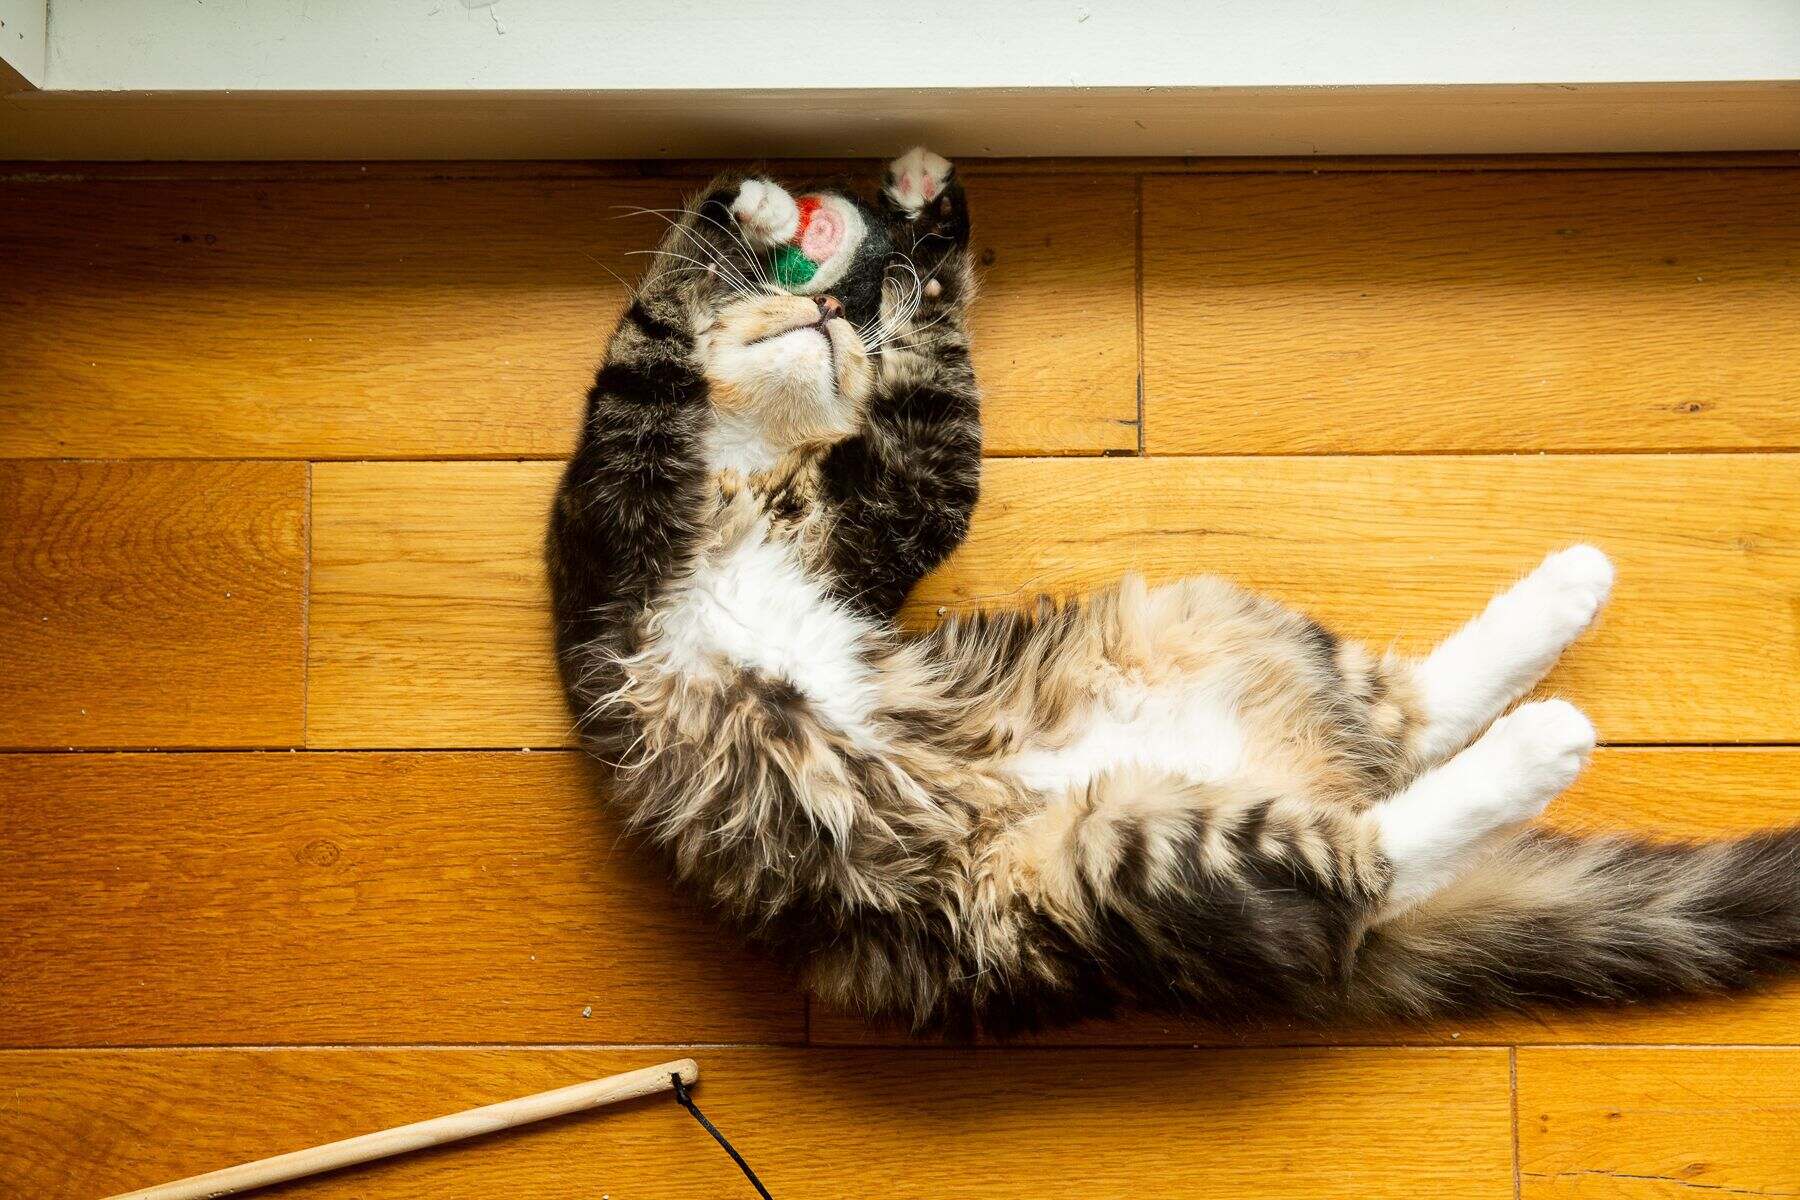 Mysterious Cat Death: Shocking Discovery Of Lifeless Feline In Bizarre Pose